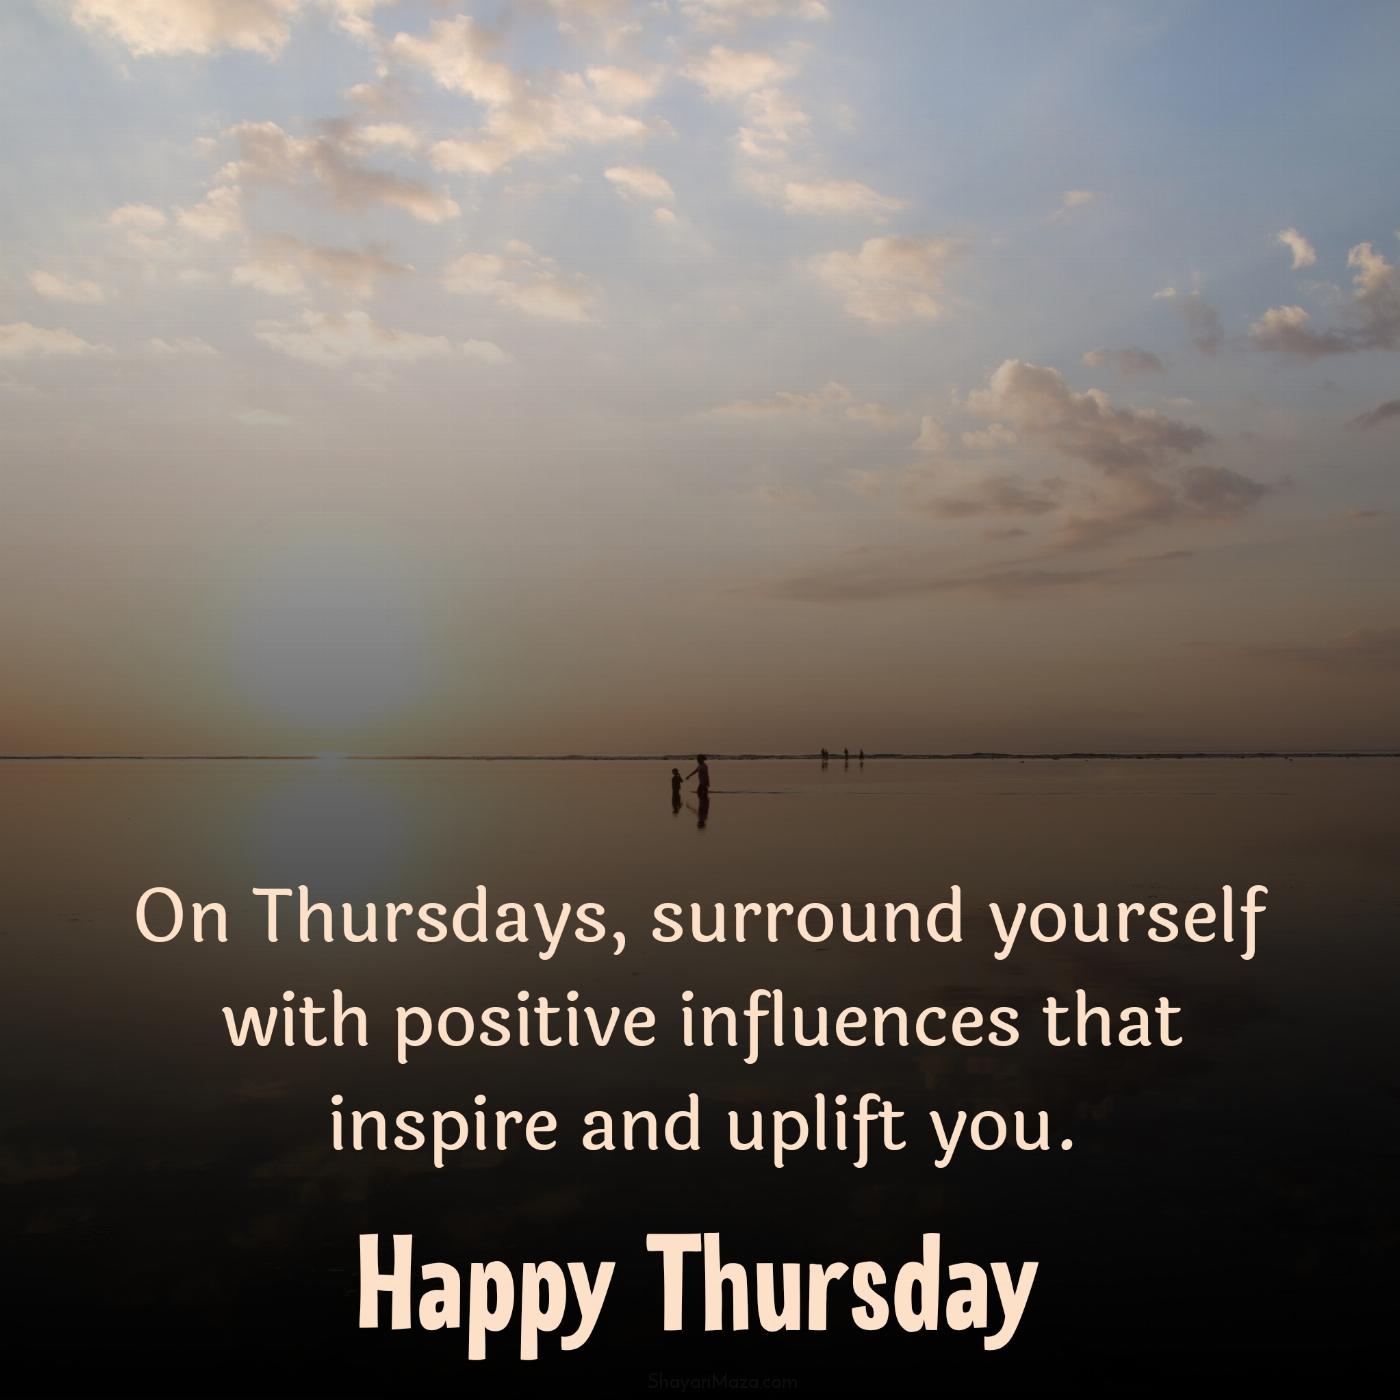 On Thursdays surround yourself with positive influences